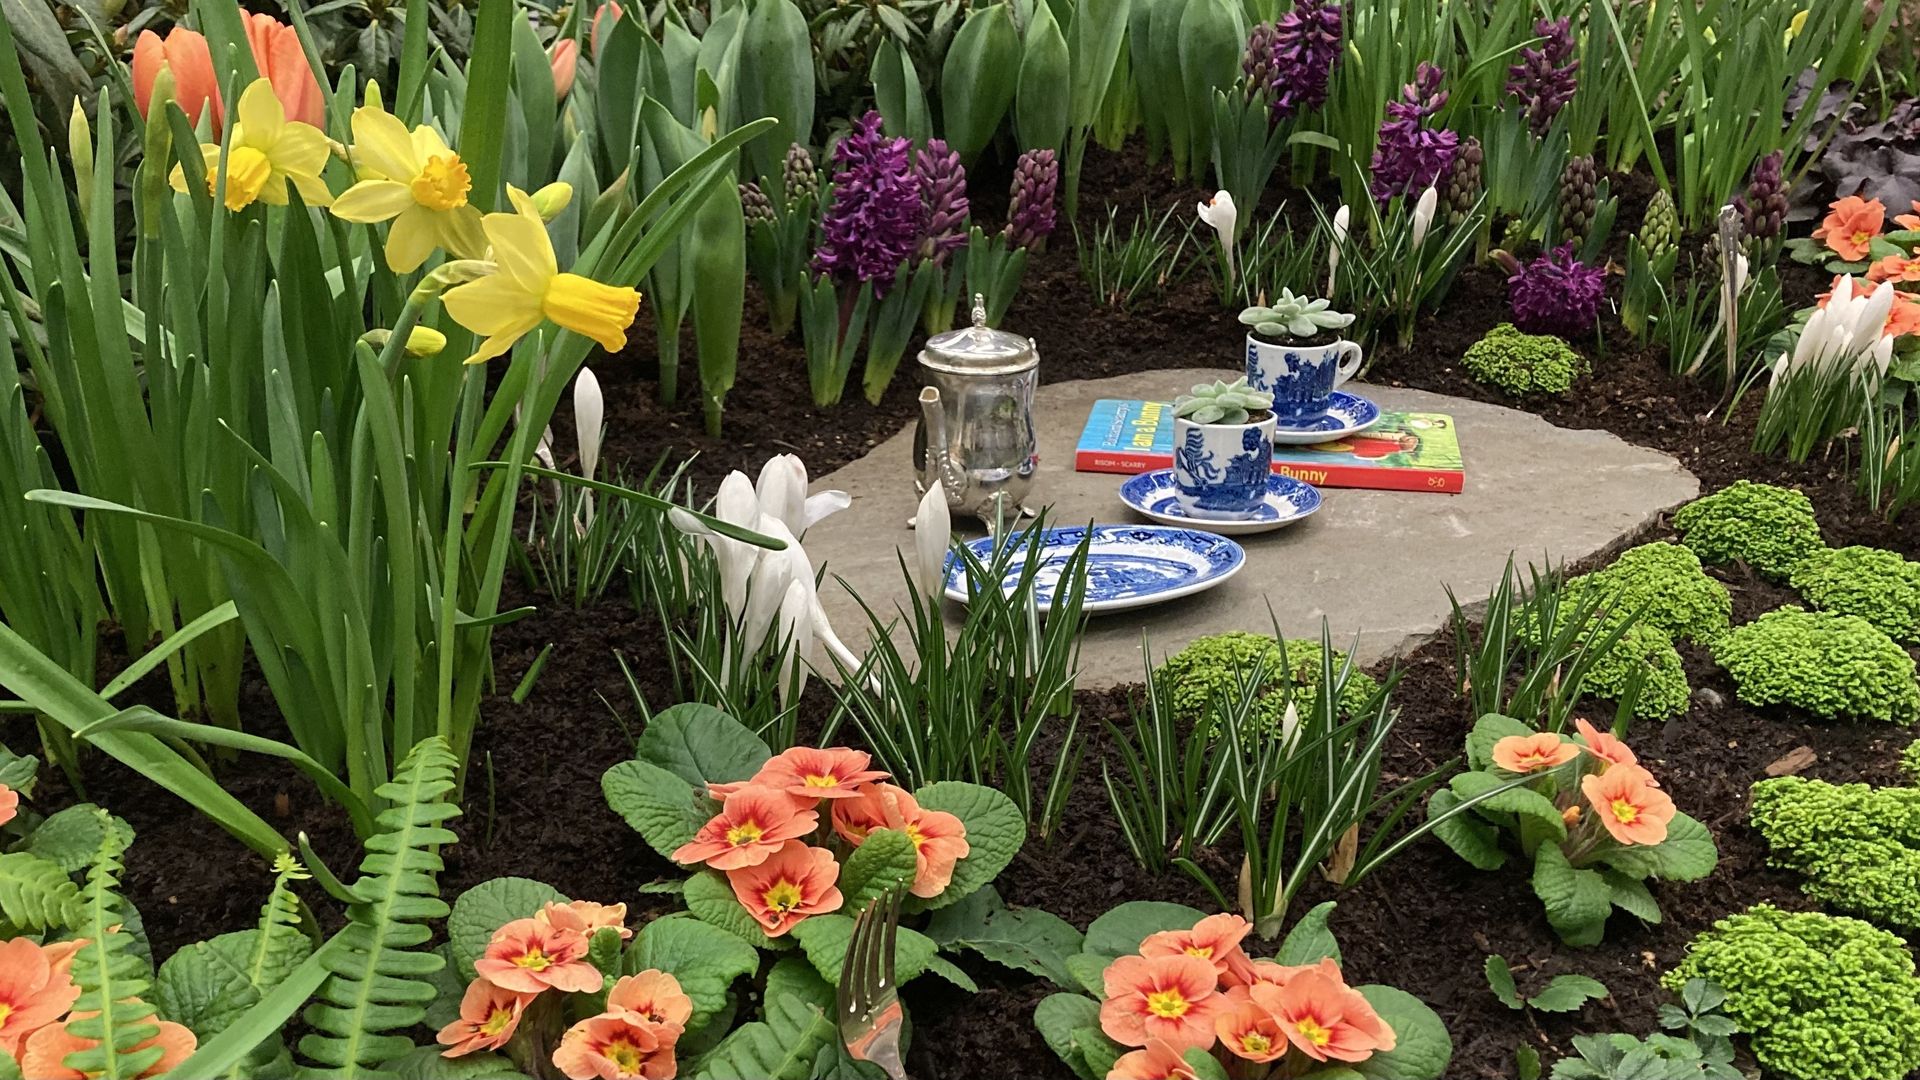 A photo of blooming flowers and a tea set on table in the middle.